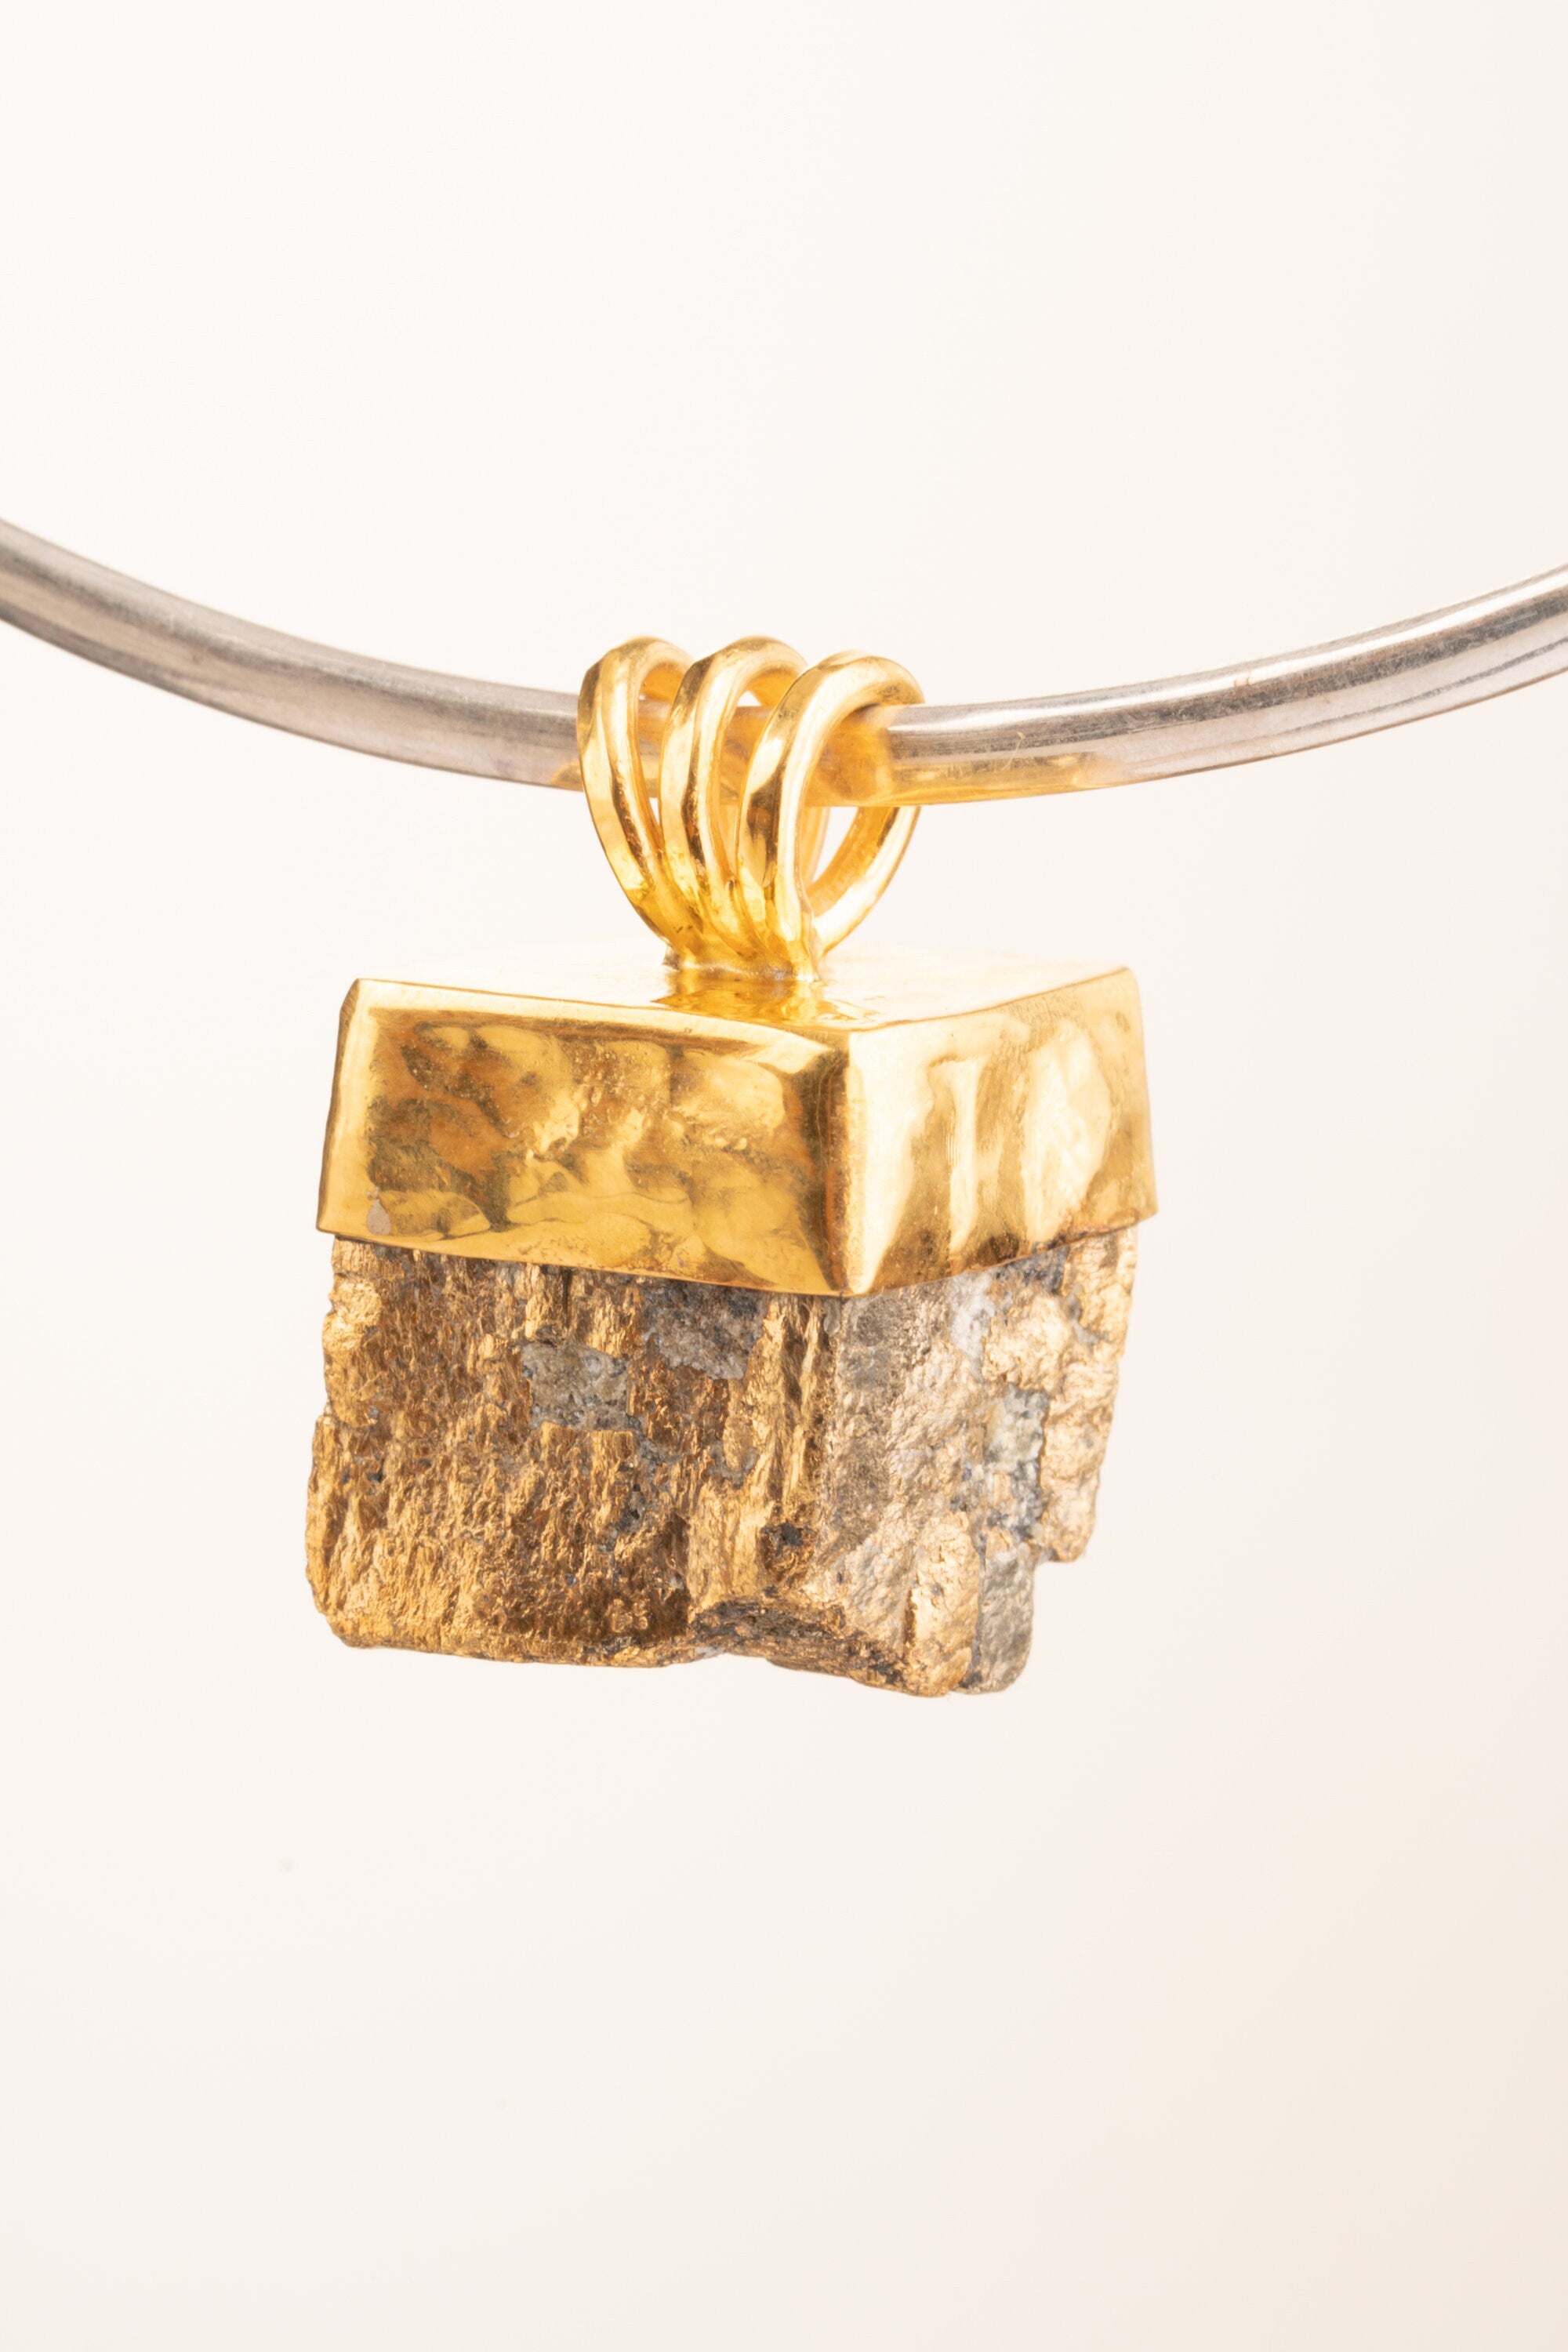 Gold Plated Pyrite Cube Beacon - Sterling Silver Pendant - Hammered Texture - Gold Plated